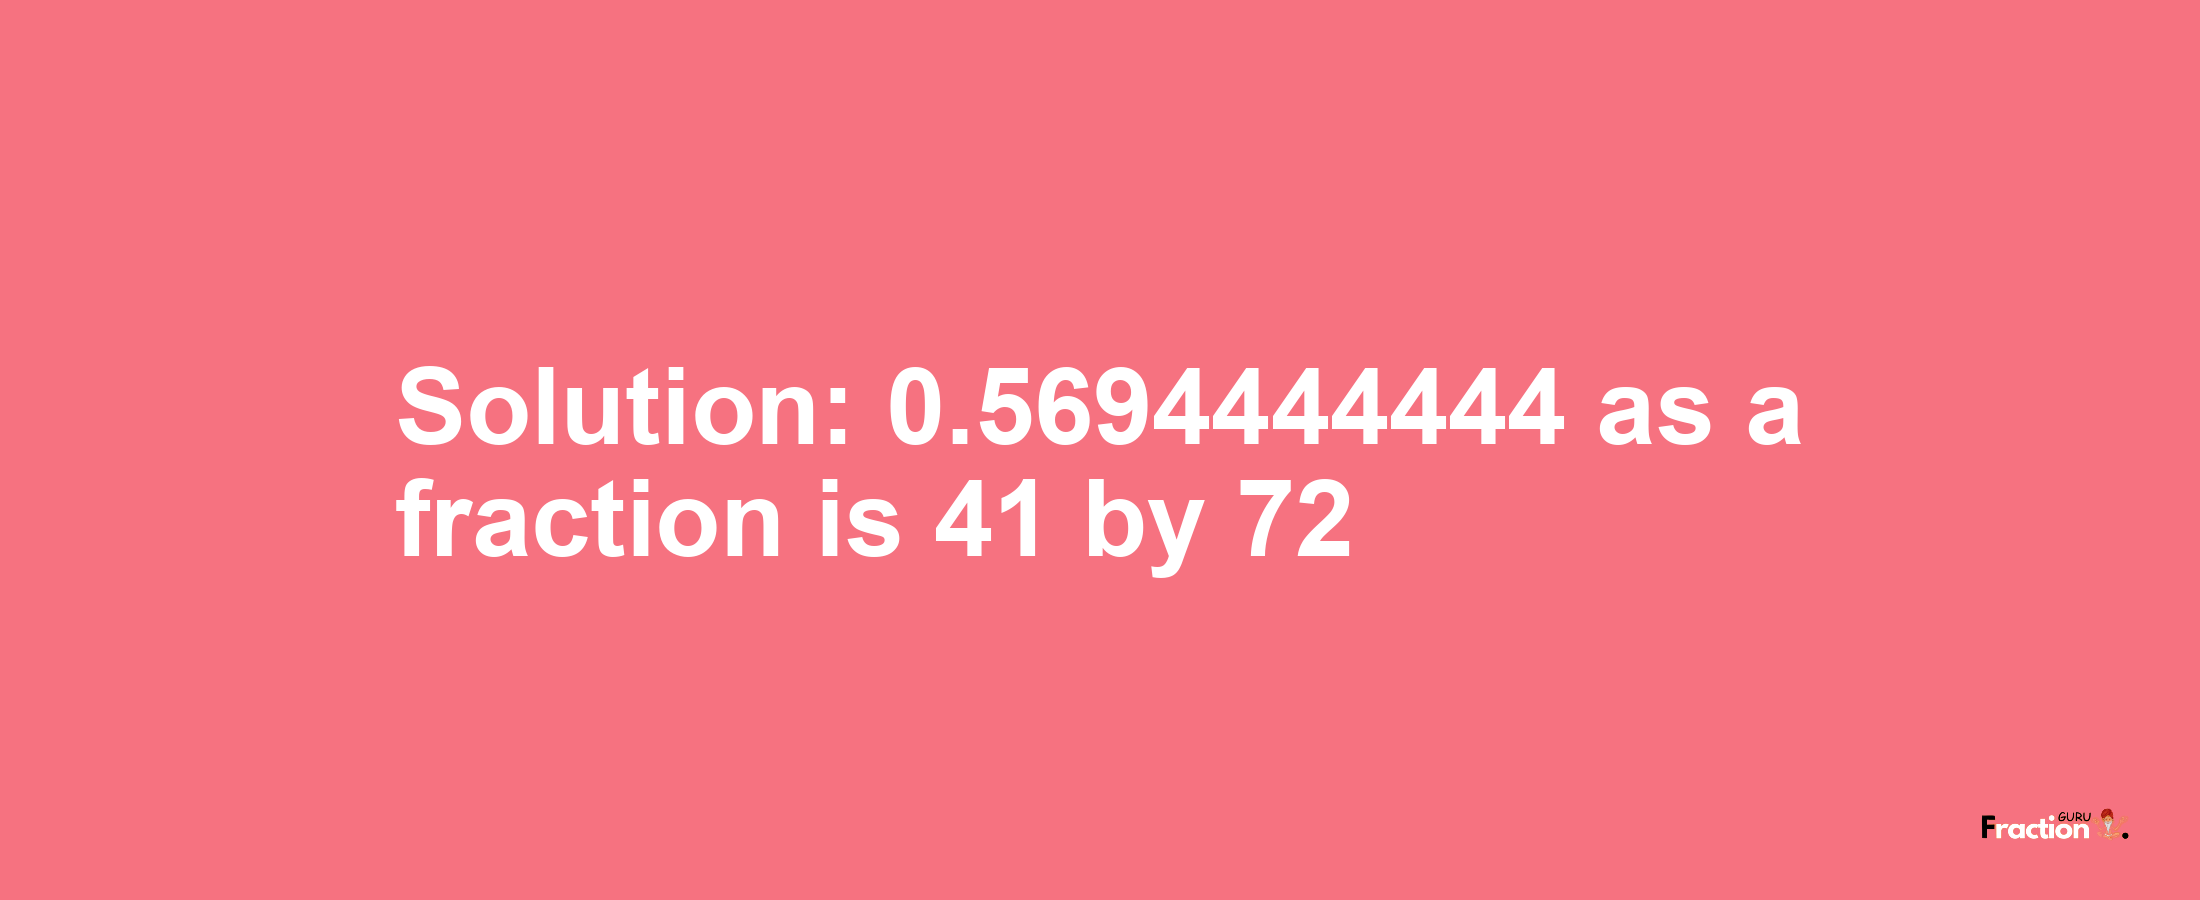 Solution:0.5694444444 as a fraction is 41/72